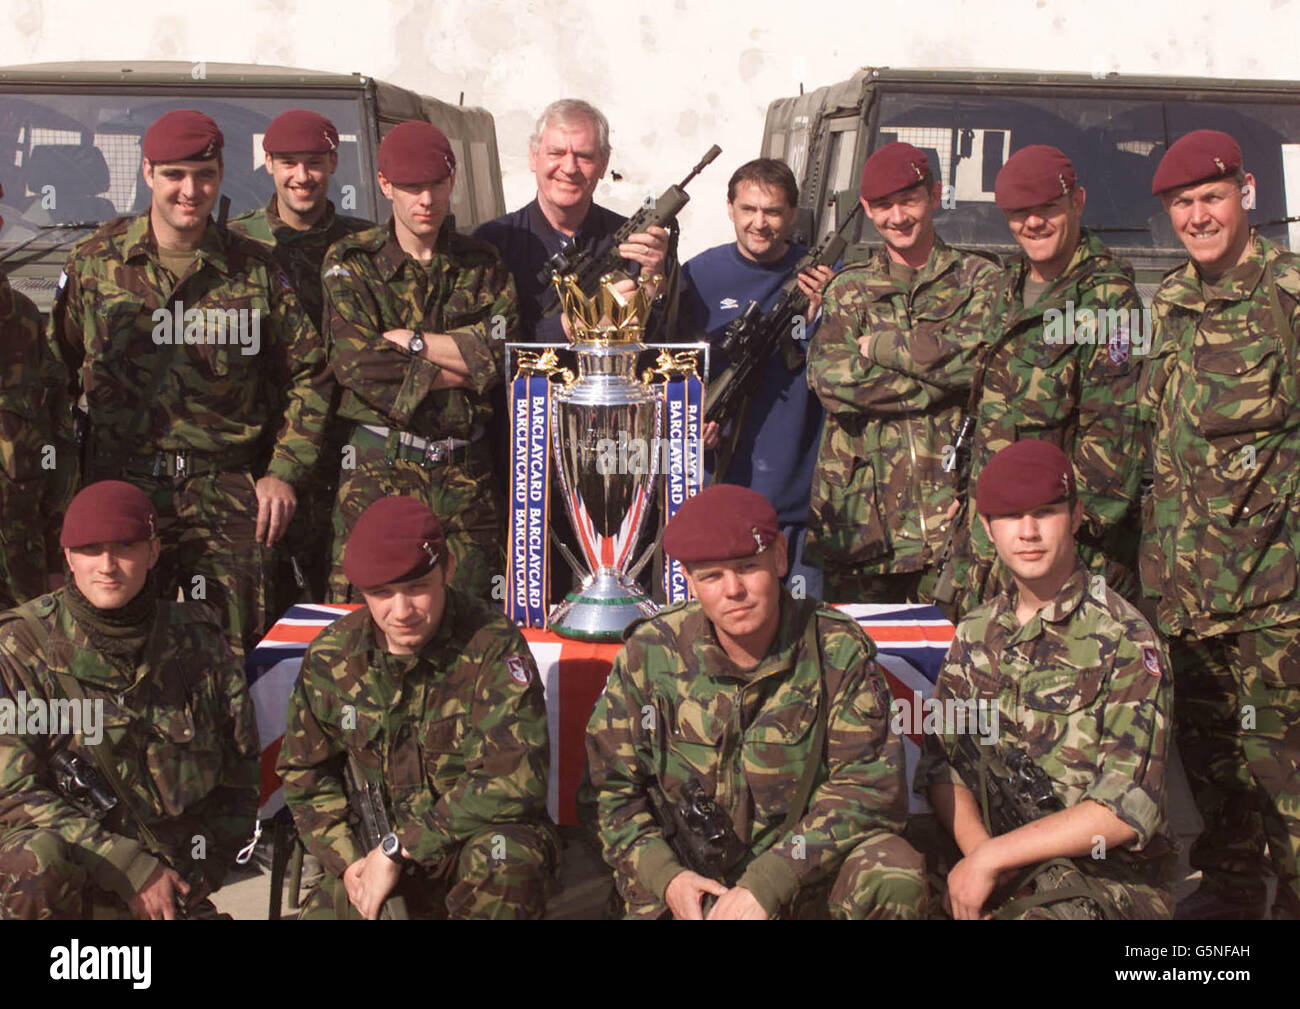 Troops from 216 Royal Signals in Kabul, Afghanistan swap their weapons for the Barclaycard Premiership trophy Wednesday 13th February, 2002. The trophy and Football Association ambasadors Lawrie McMenemy and Gary Mabbutt (centre) * are in the war ravaged country on a morale boosting trip to organise a soccer match between ISAF (International Security Assistance Force) troops and Kabul FC at the Olympic Stadium this Friday, the stadium more infamous for the executions held there by the former Taliban regime than its sporting events. The army team is made up of soldiers from Great Britain, Stock Photo